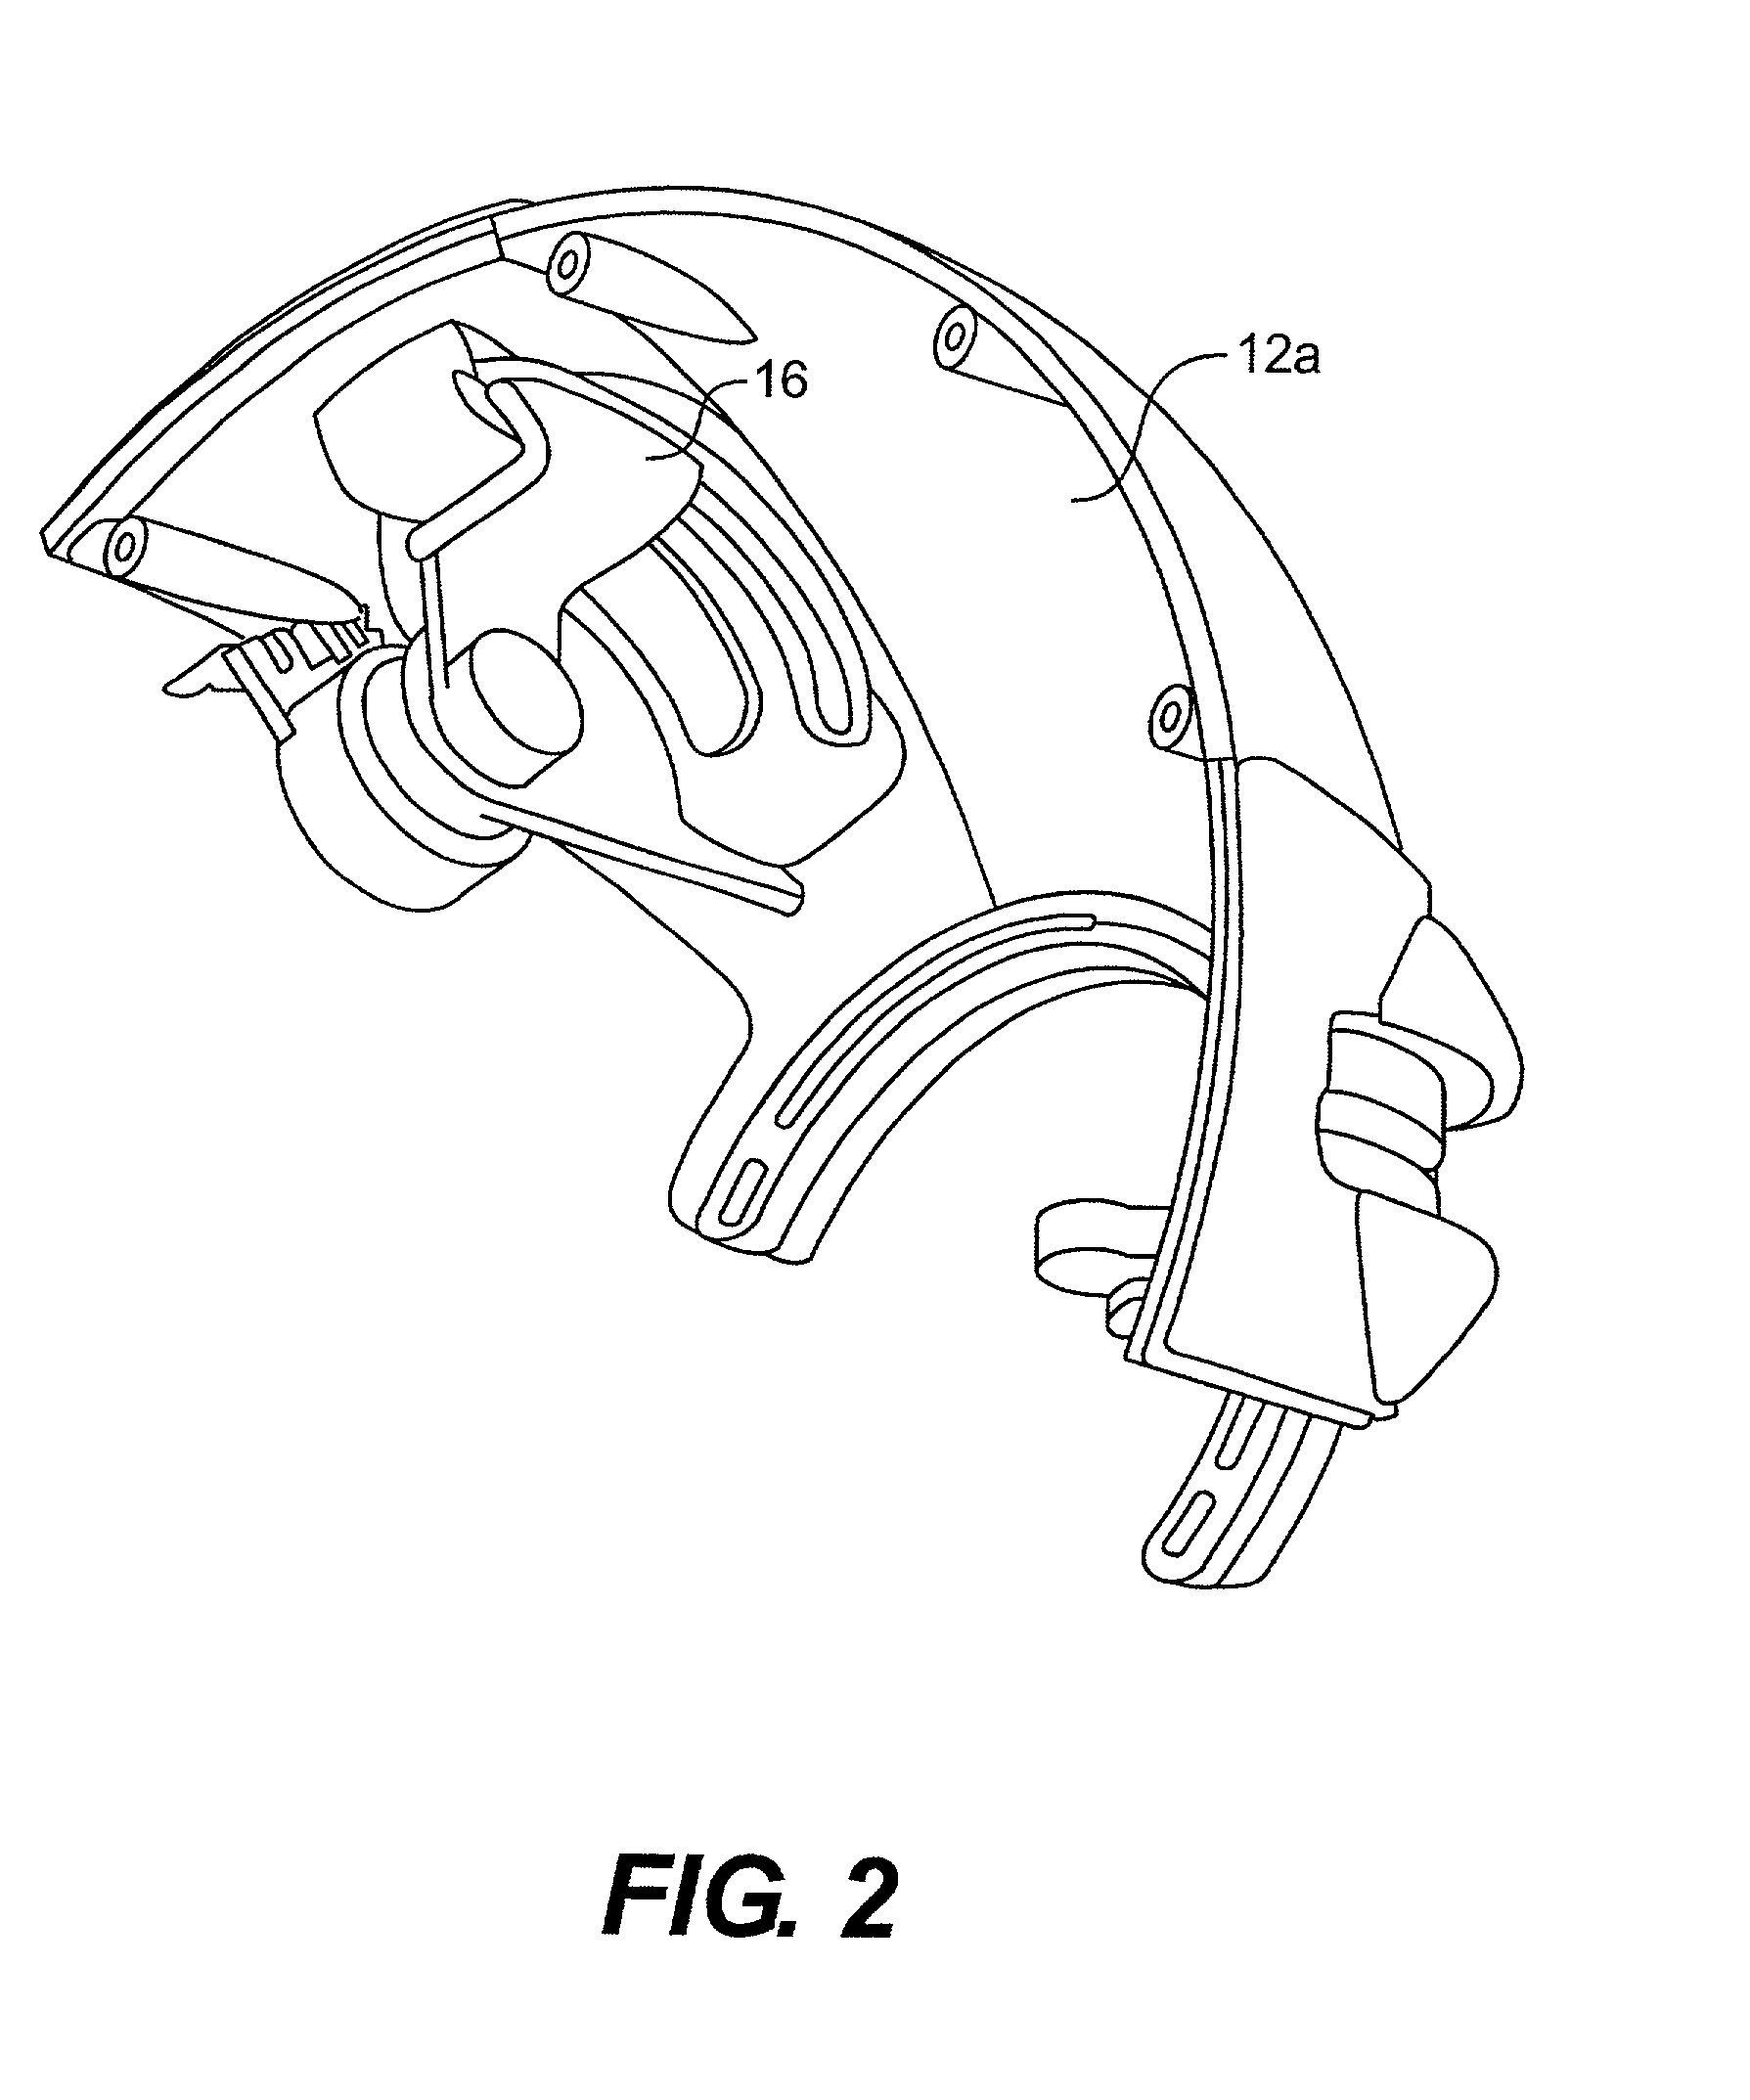 System for a portable hands-free breast pump and method of using the same